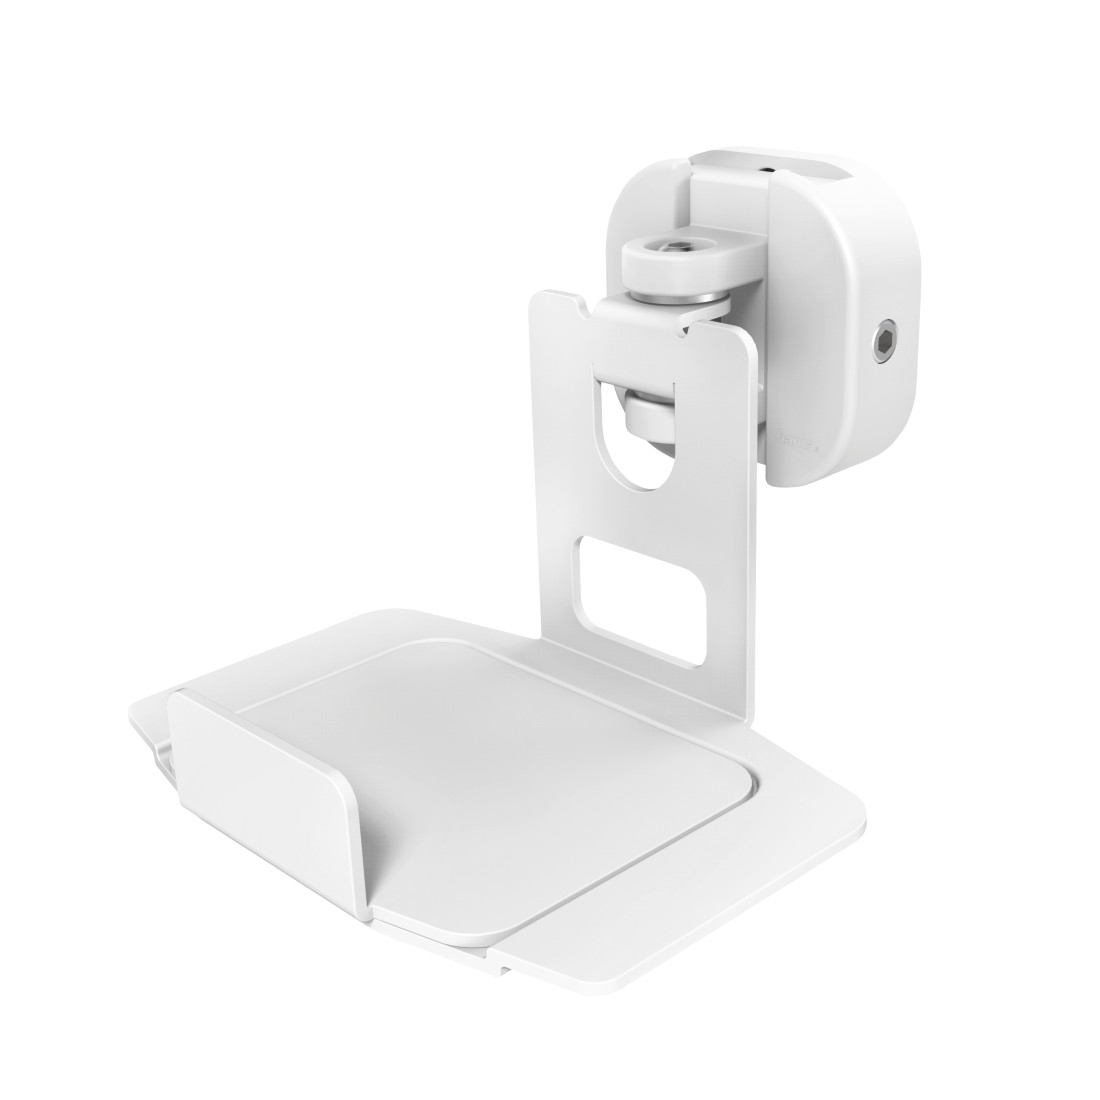 00118034 Hama Wall Holder for Bose Soundtouch 10/20, white